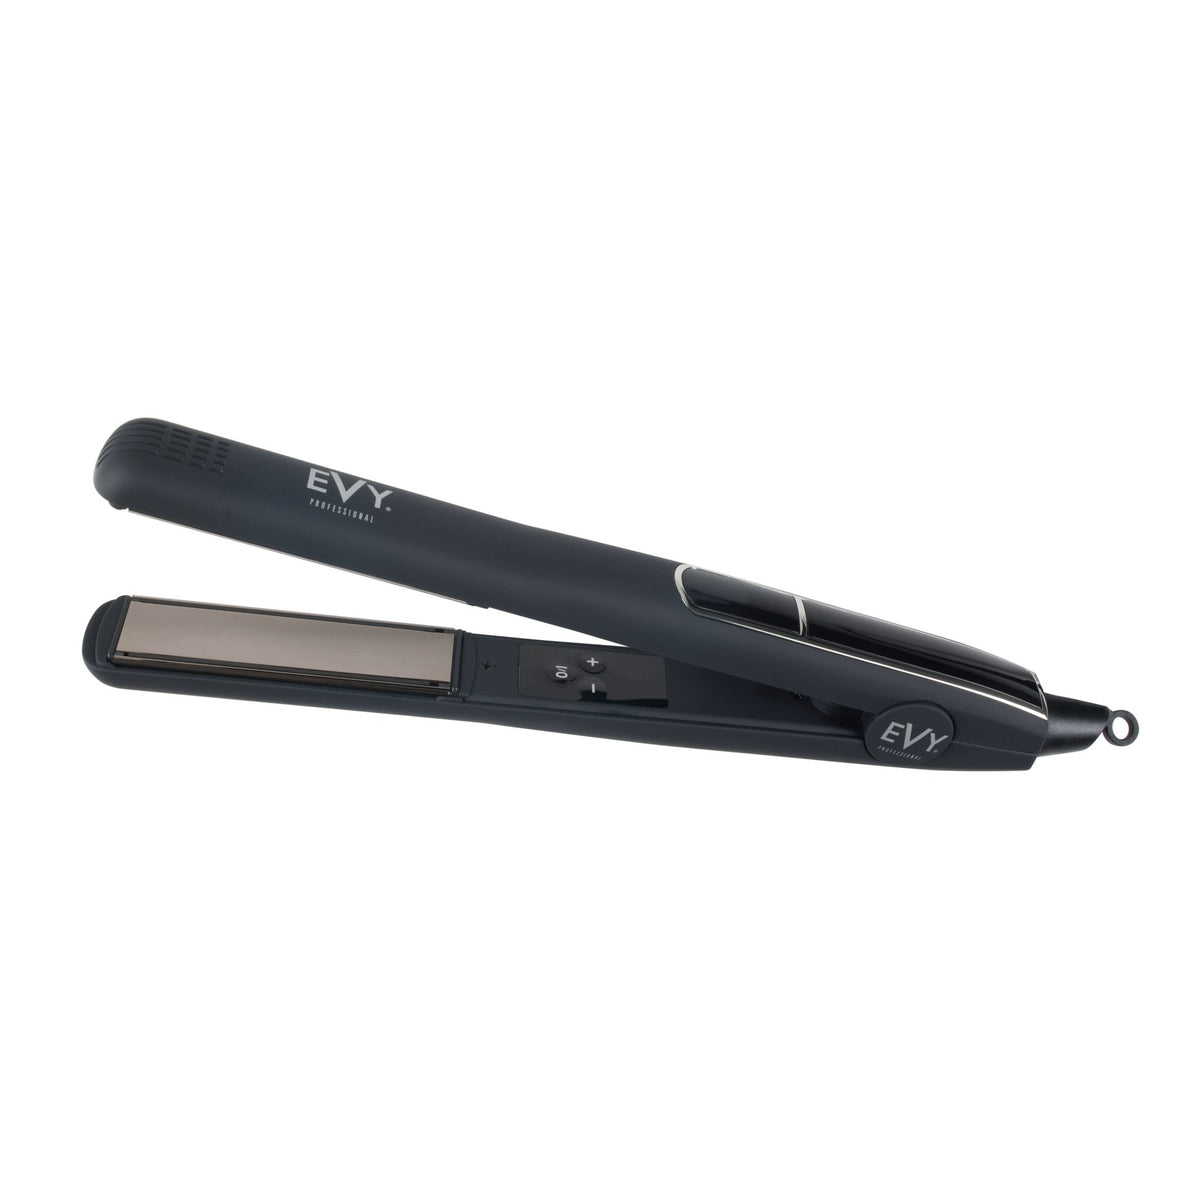 Evy iQ-OneGlide 1" Hair Straightener - Haircare Superstore